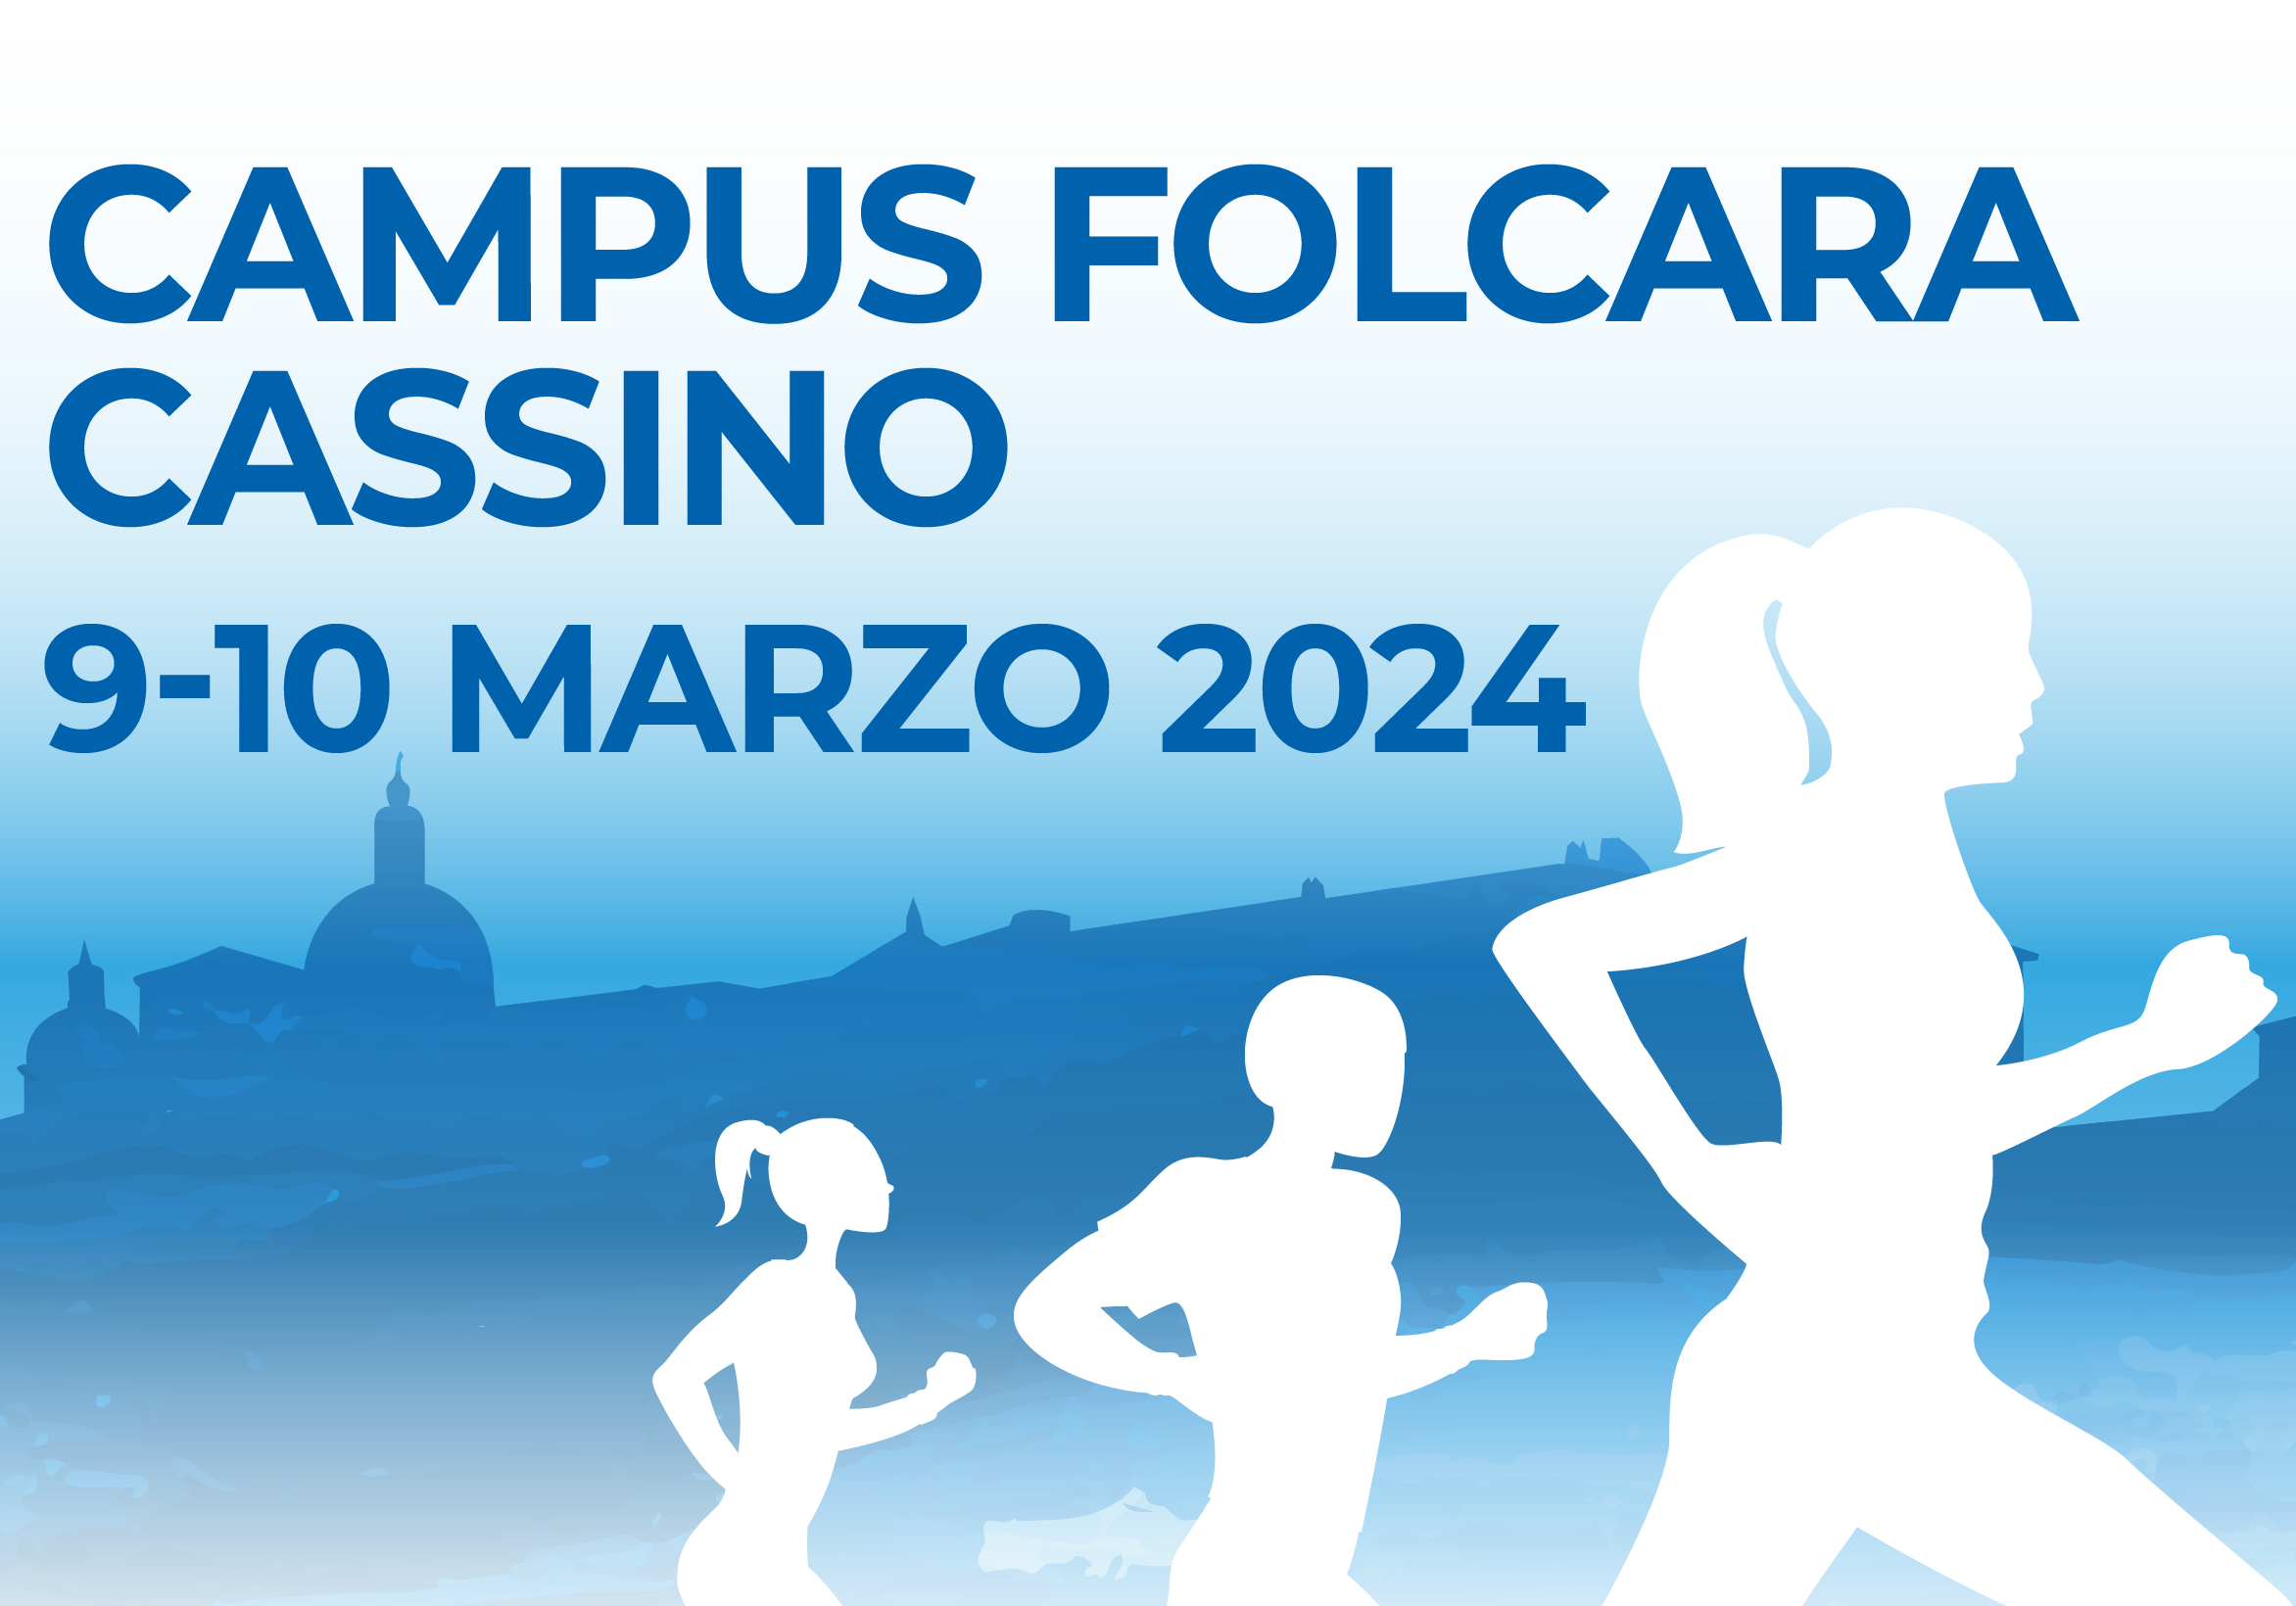 Background_image_Campus_Folcara_Cassino_mobile